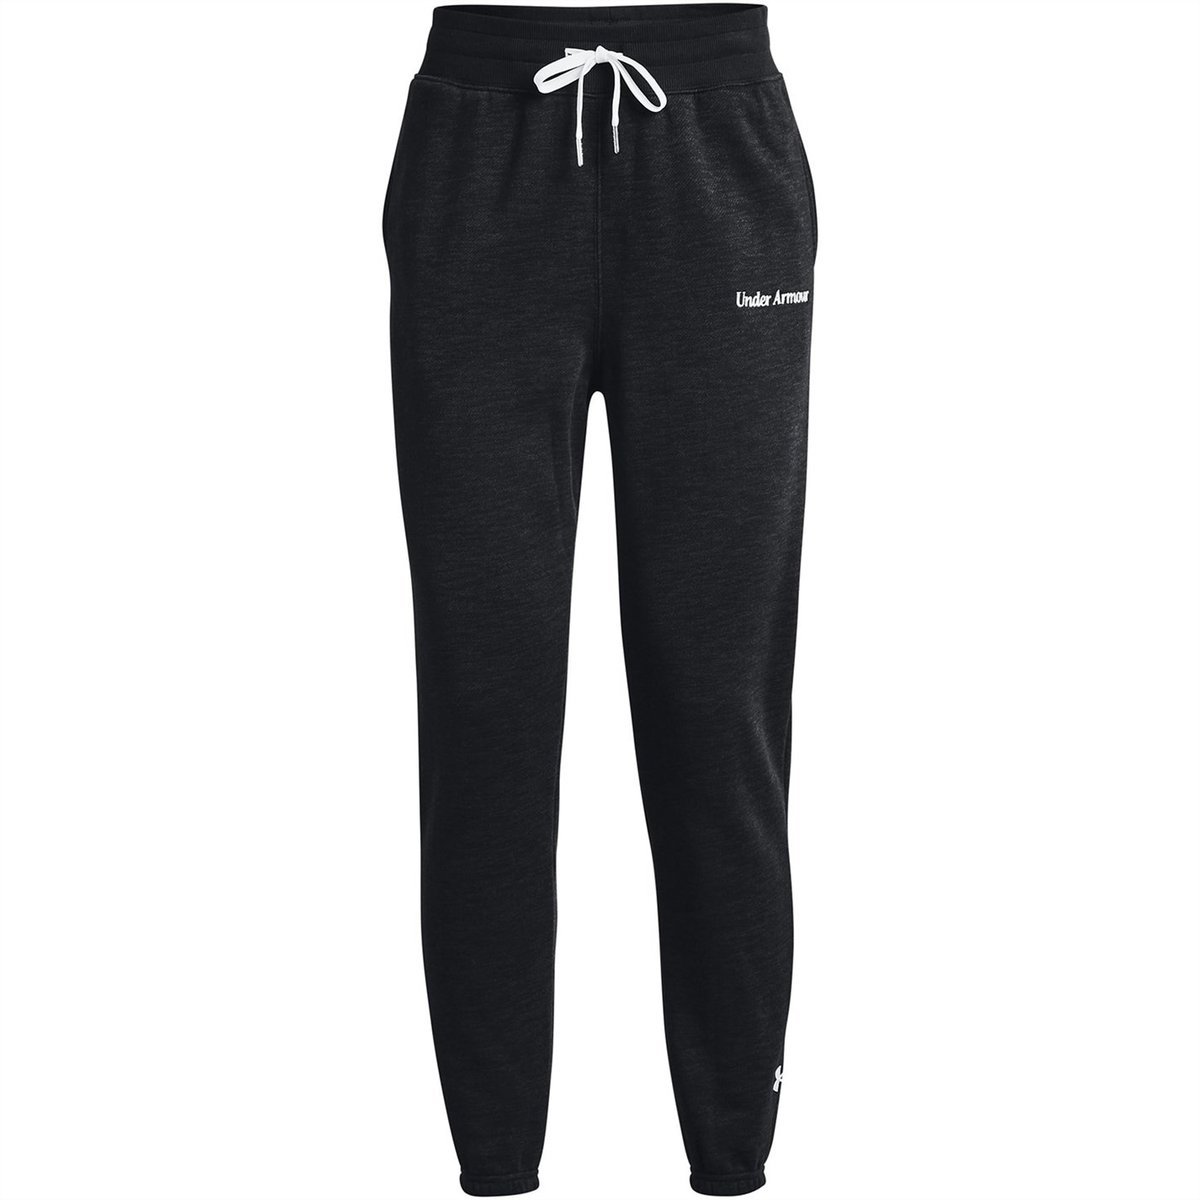 adidas, Linear Slim Fit Cotton Joggers Womens